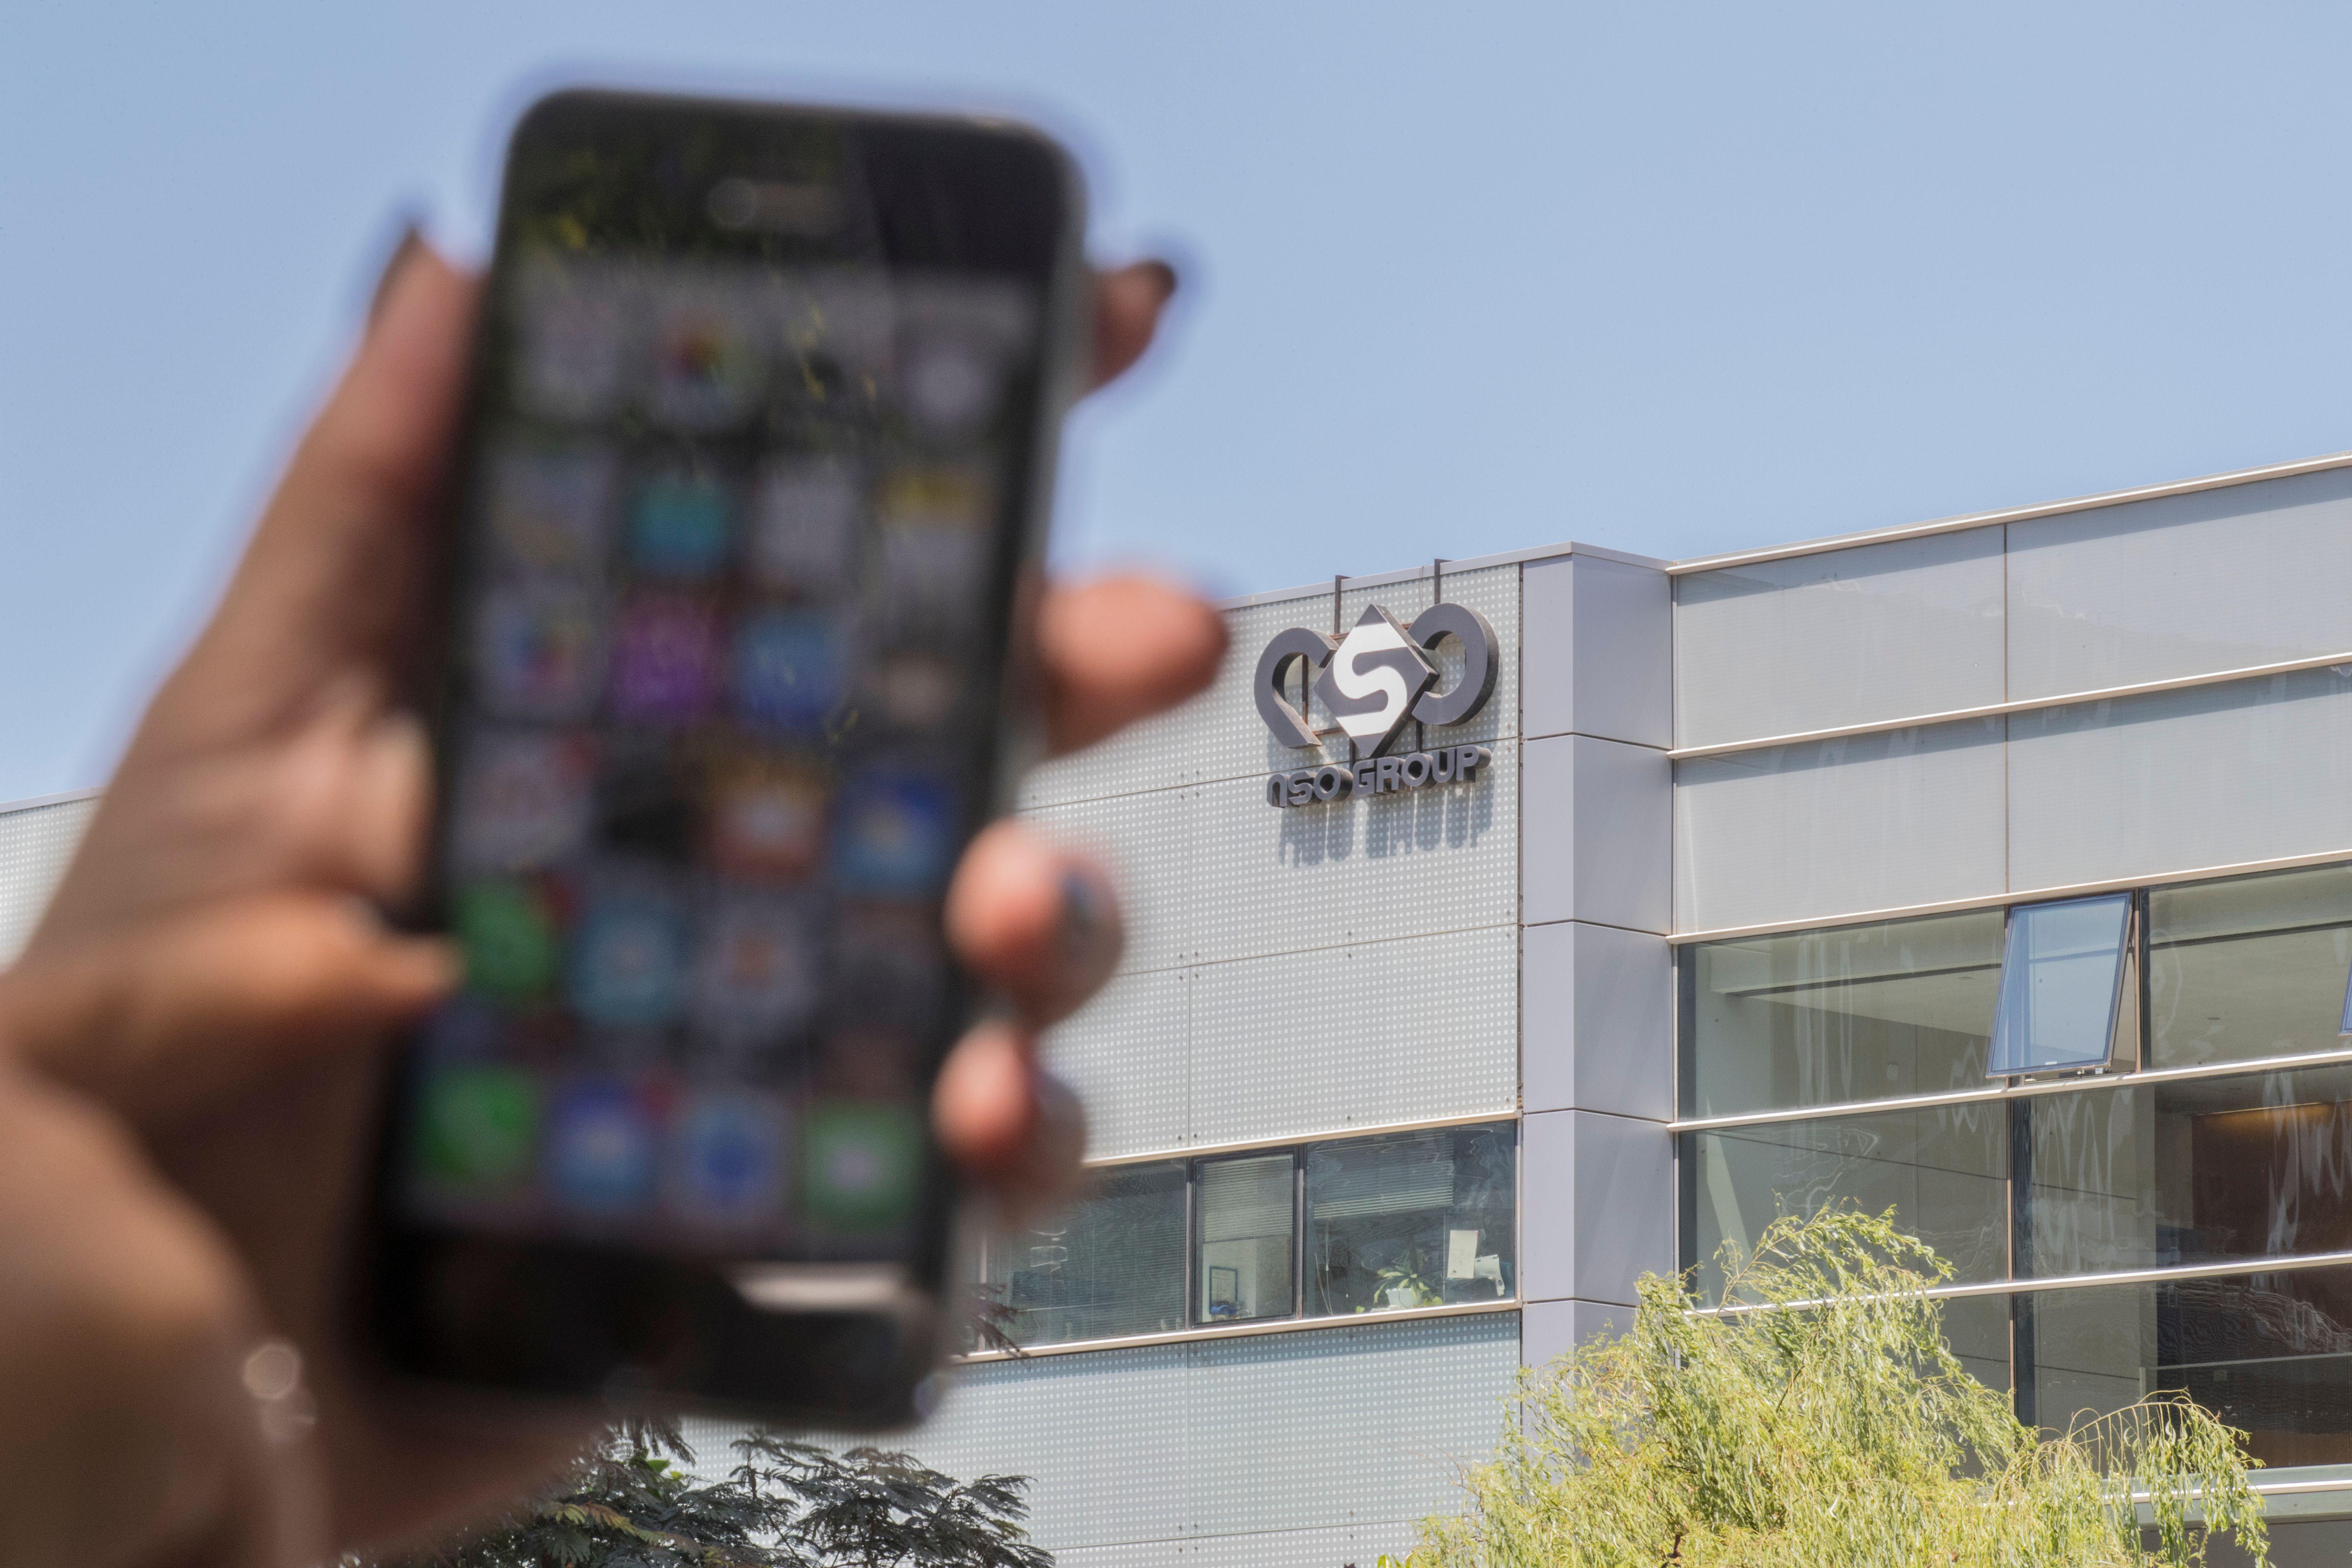 An Israeli woman uses her iPhone in front of the building housing the Israeli NSO group, on August 28, 2016, in Herzliya, near Tel Aviv. Lookout and Citizen Lab worked with Apple on an iOS patch to defend against what was called "Trident" because of its triad of attack methods, the researchers said in a joint blog post.
Trident is used in spyware referred to as Pegasus, which a Citizen Lab investigation showed was made by an Israel-based organization called NSO Group. (Photo by JACK GUEZ / AFP) (Photo by JACK GUEZ/AFP via Getty Images)